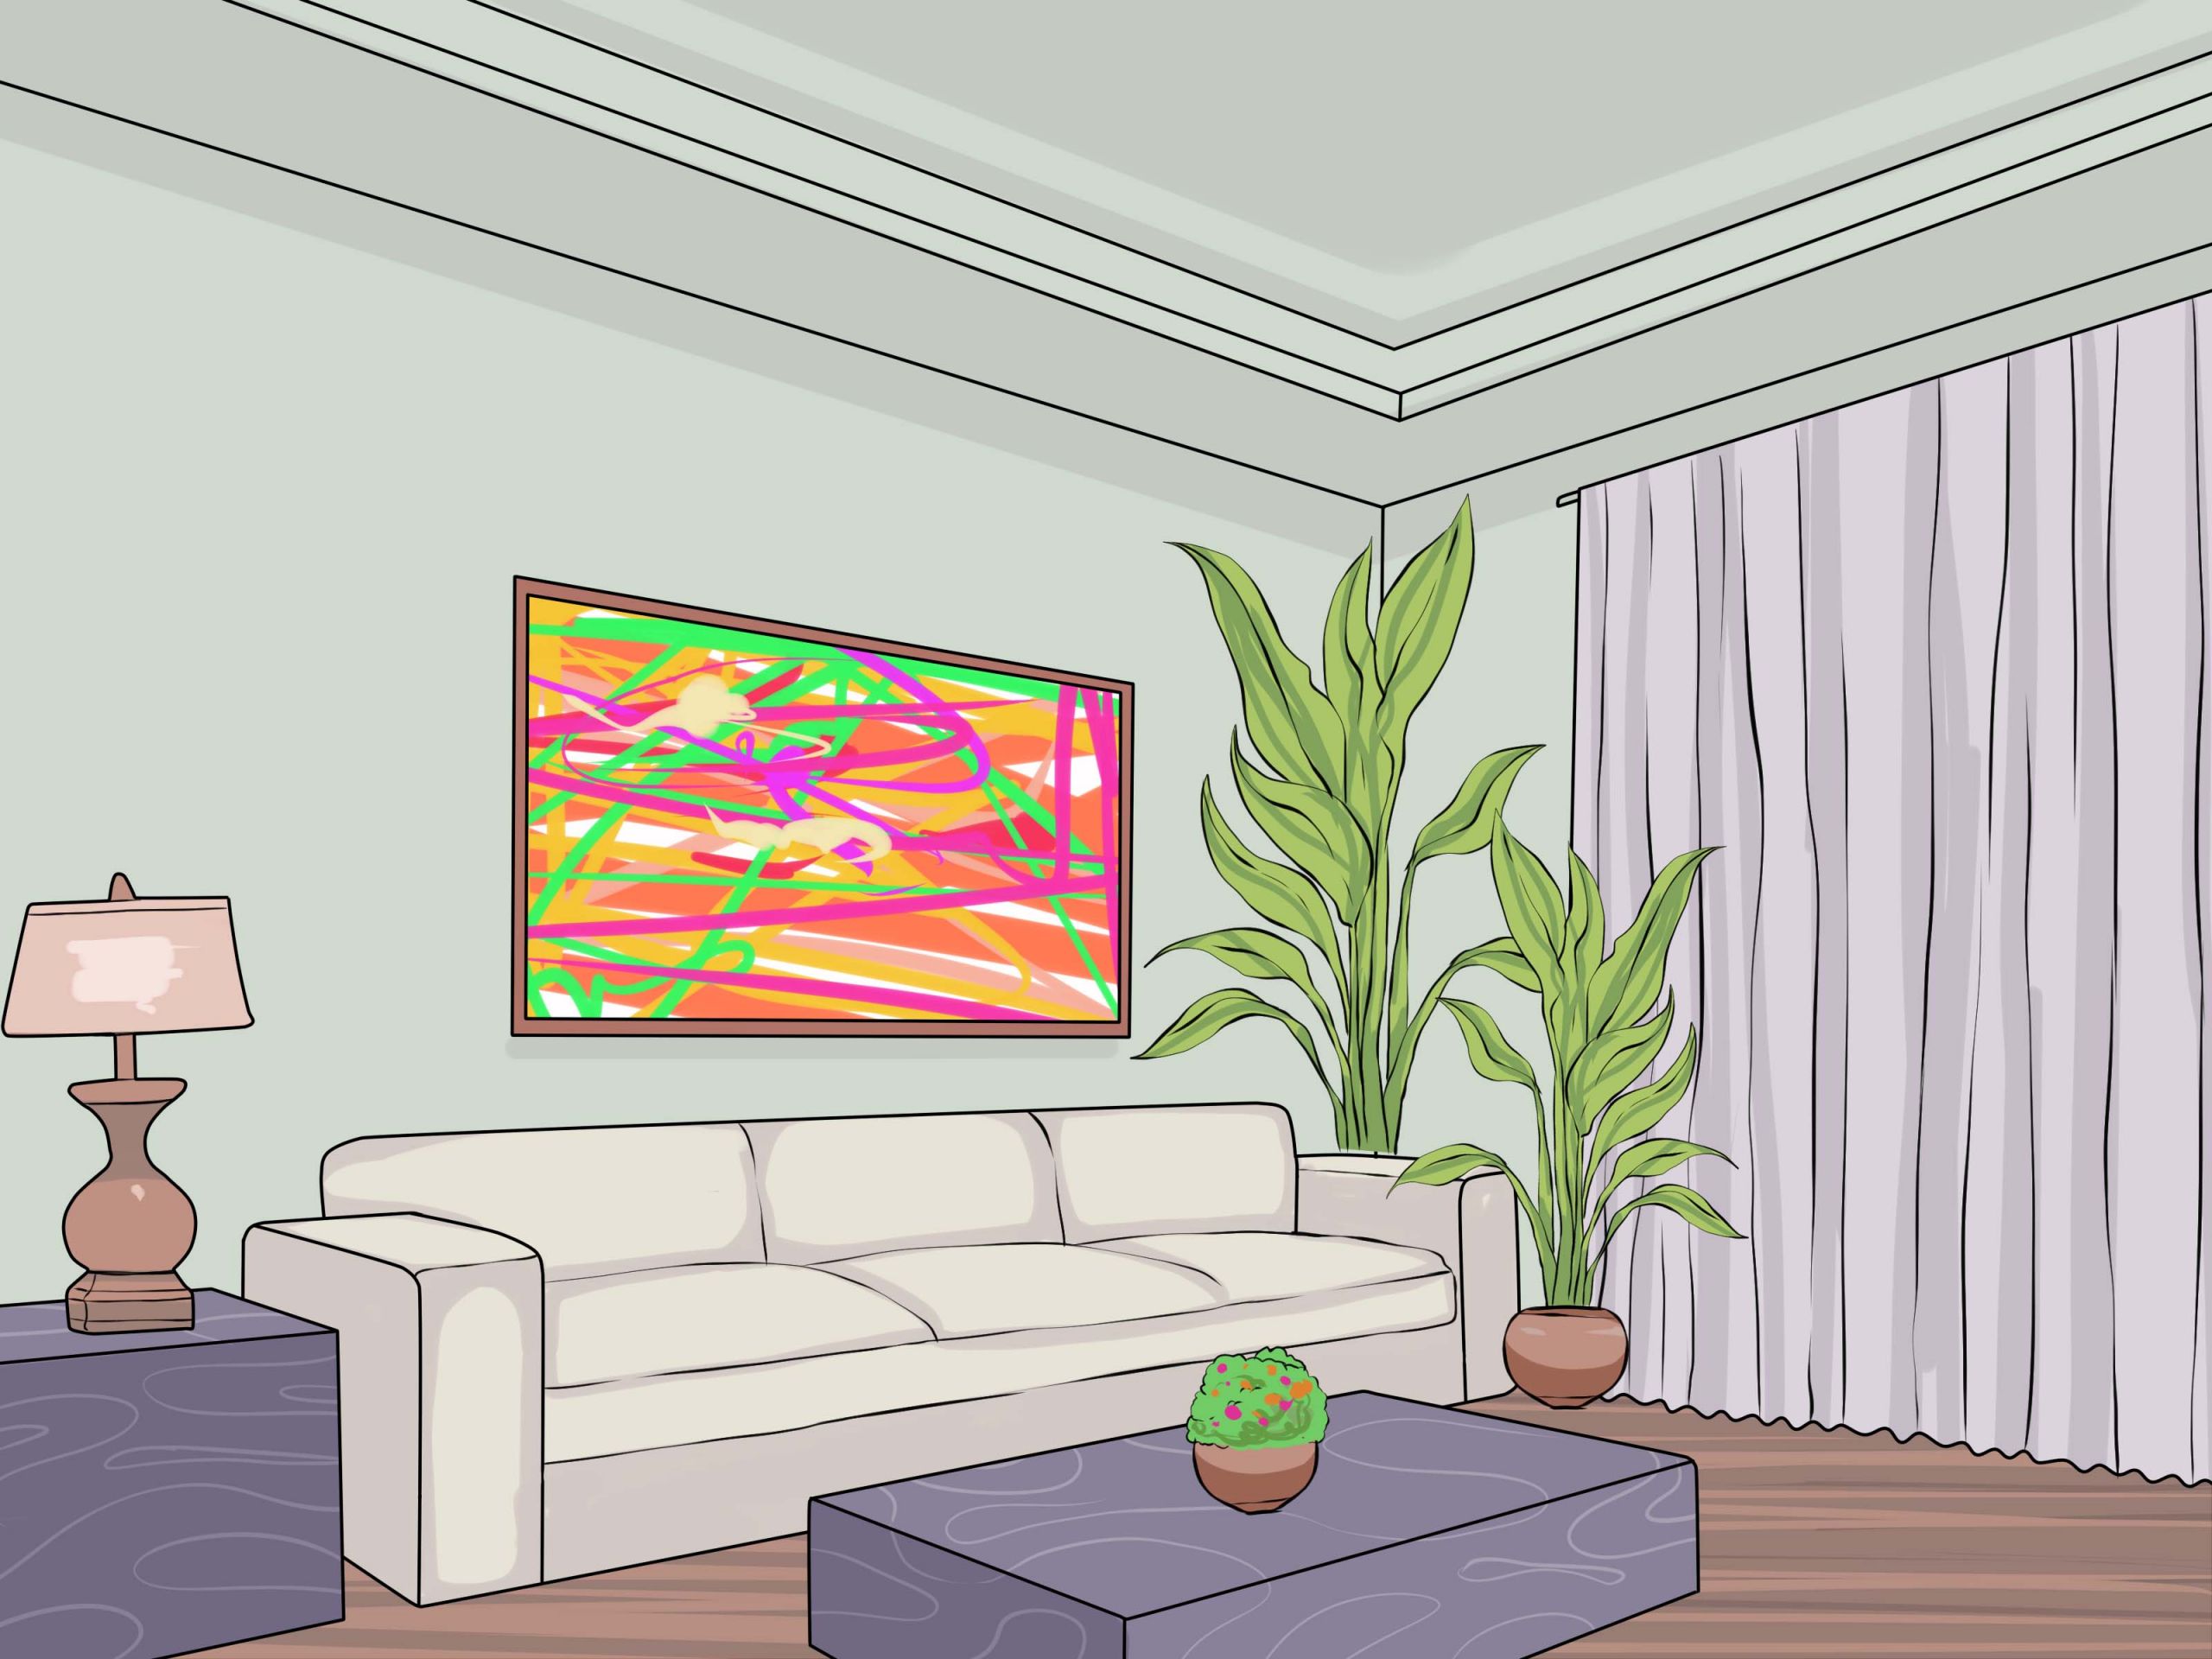 Tv and Fire Wall Awesome How to Design A Living Room 11 Steps with Wikihow